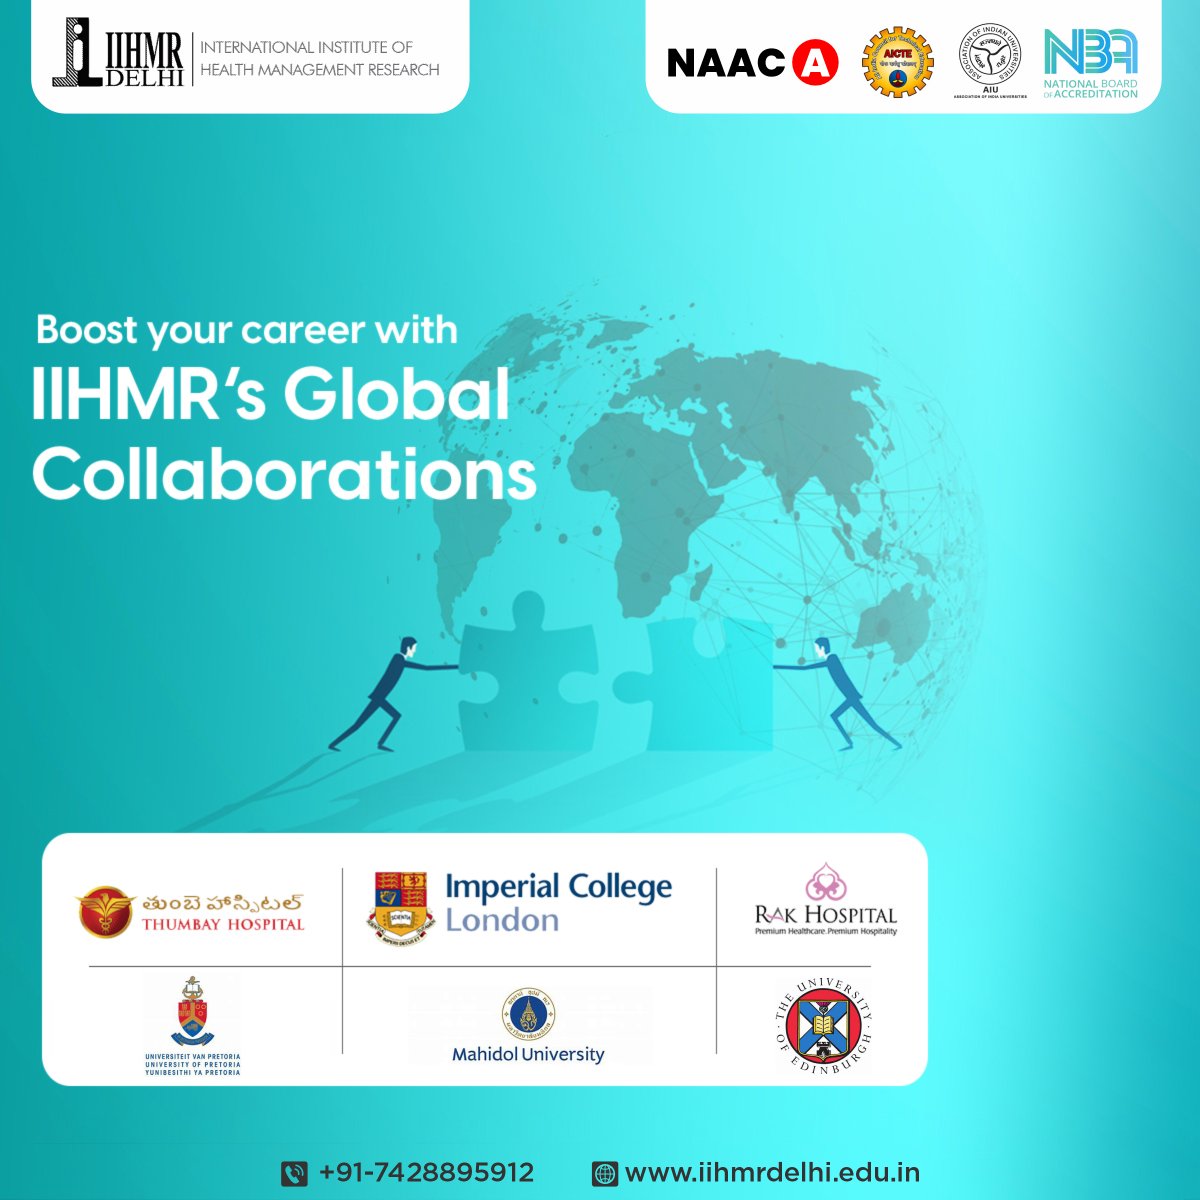 Unleash your passion for healthcare and join us as we collaborate with some of the biggest names in the industry.

For more information:
Website: bit.ly/IIHMR2023
Call: +91-7428895912

#IIHMR #iihmrdelhi #collaborations #ThumbayHospital #ImperialCollege #RAKHospital #EDII